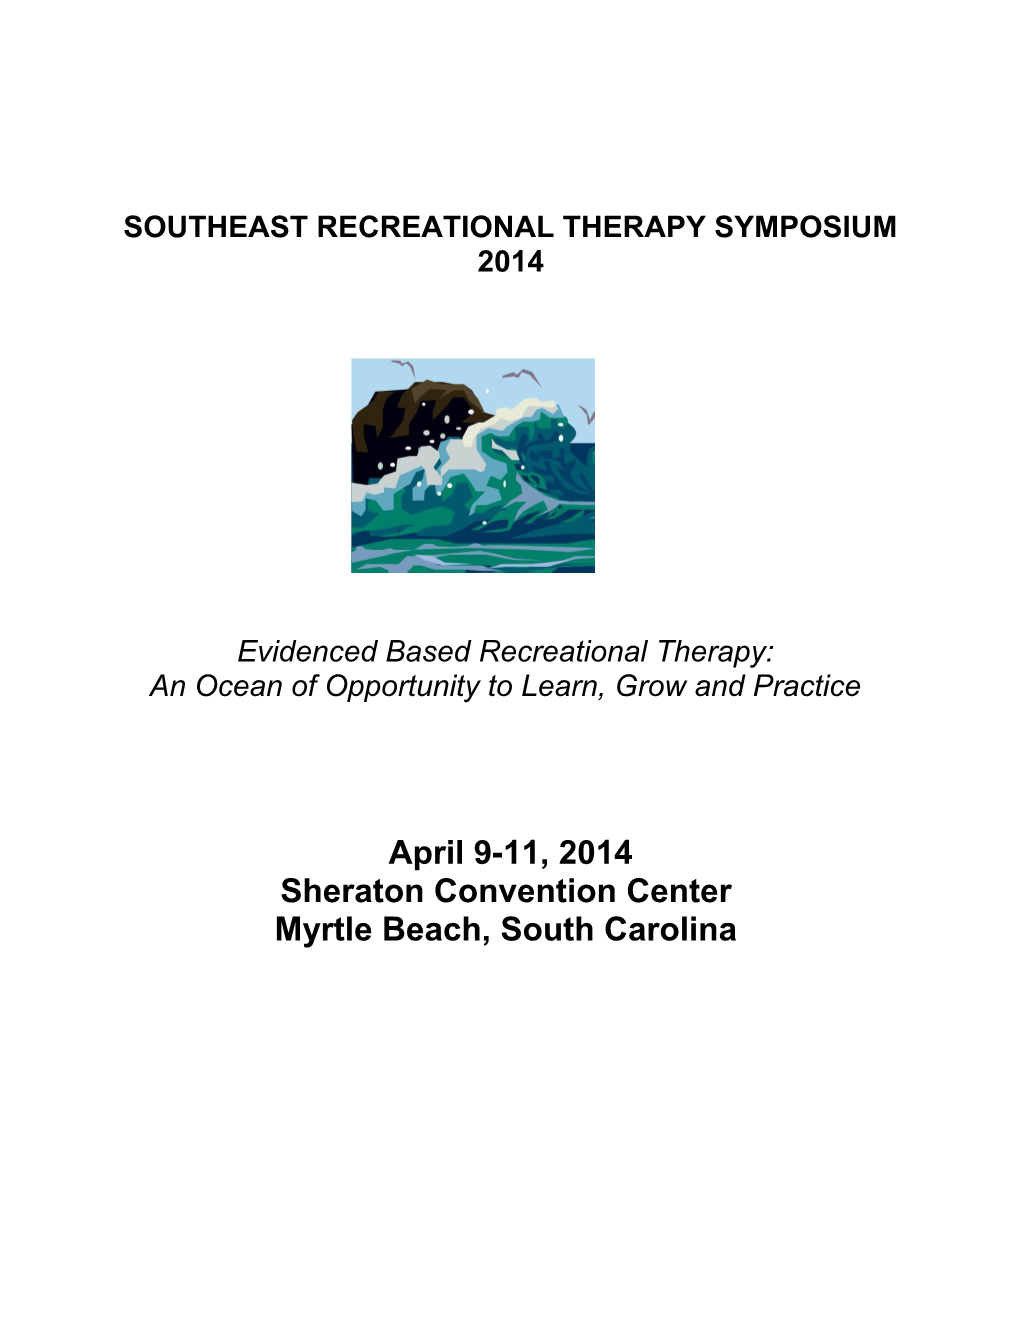 Southeast Recreational Therapy Symposium 2014